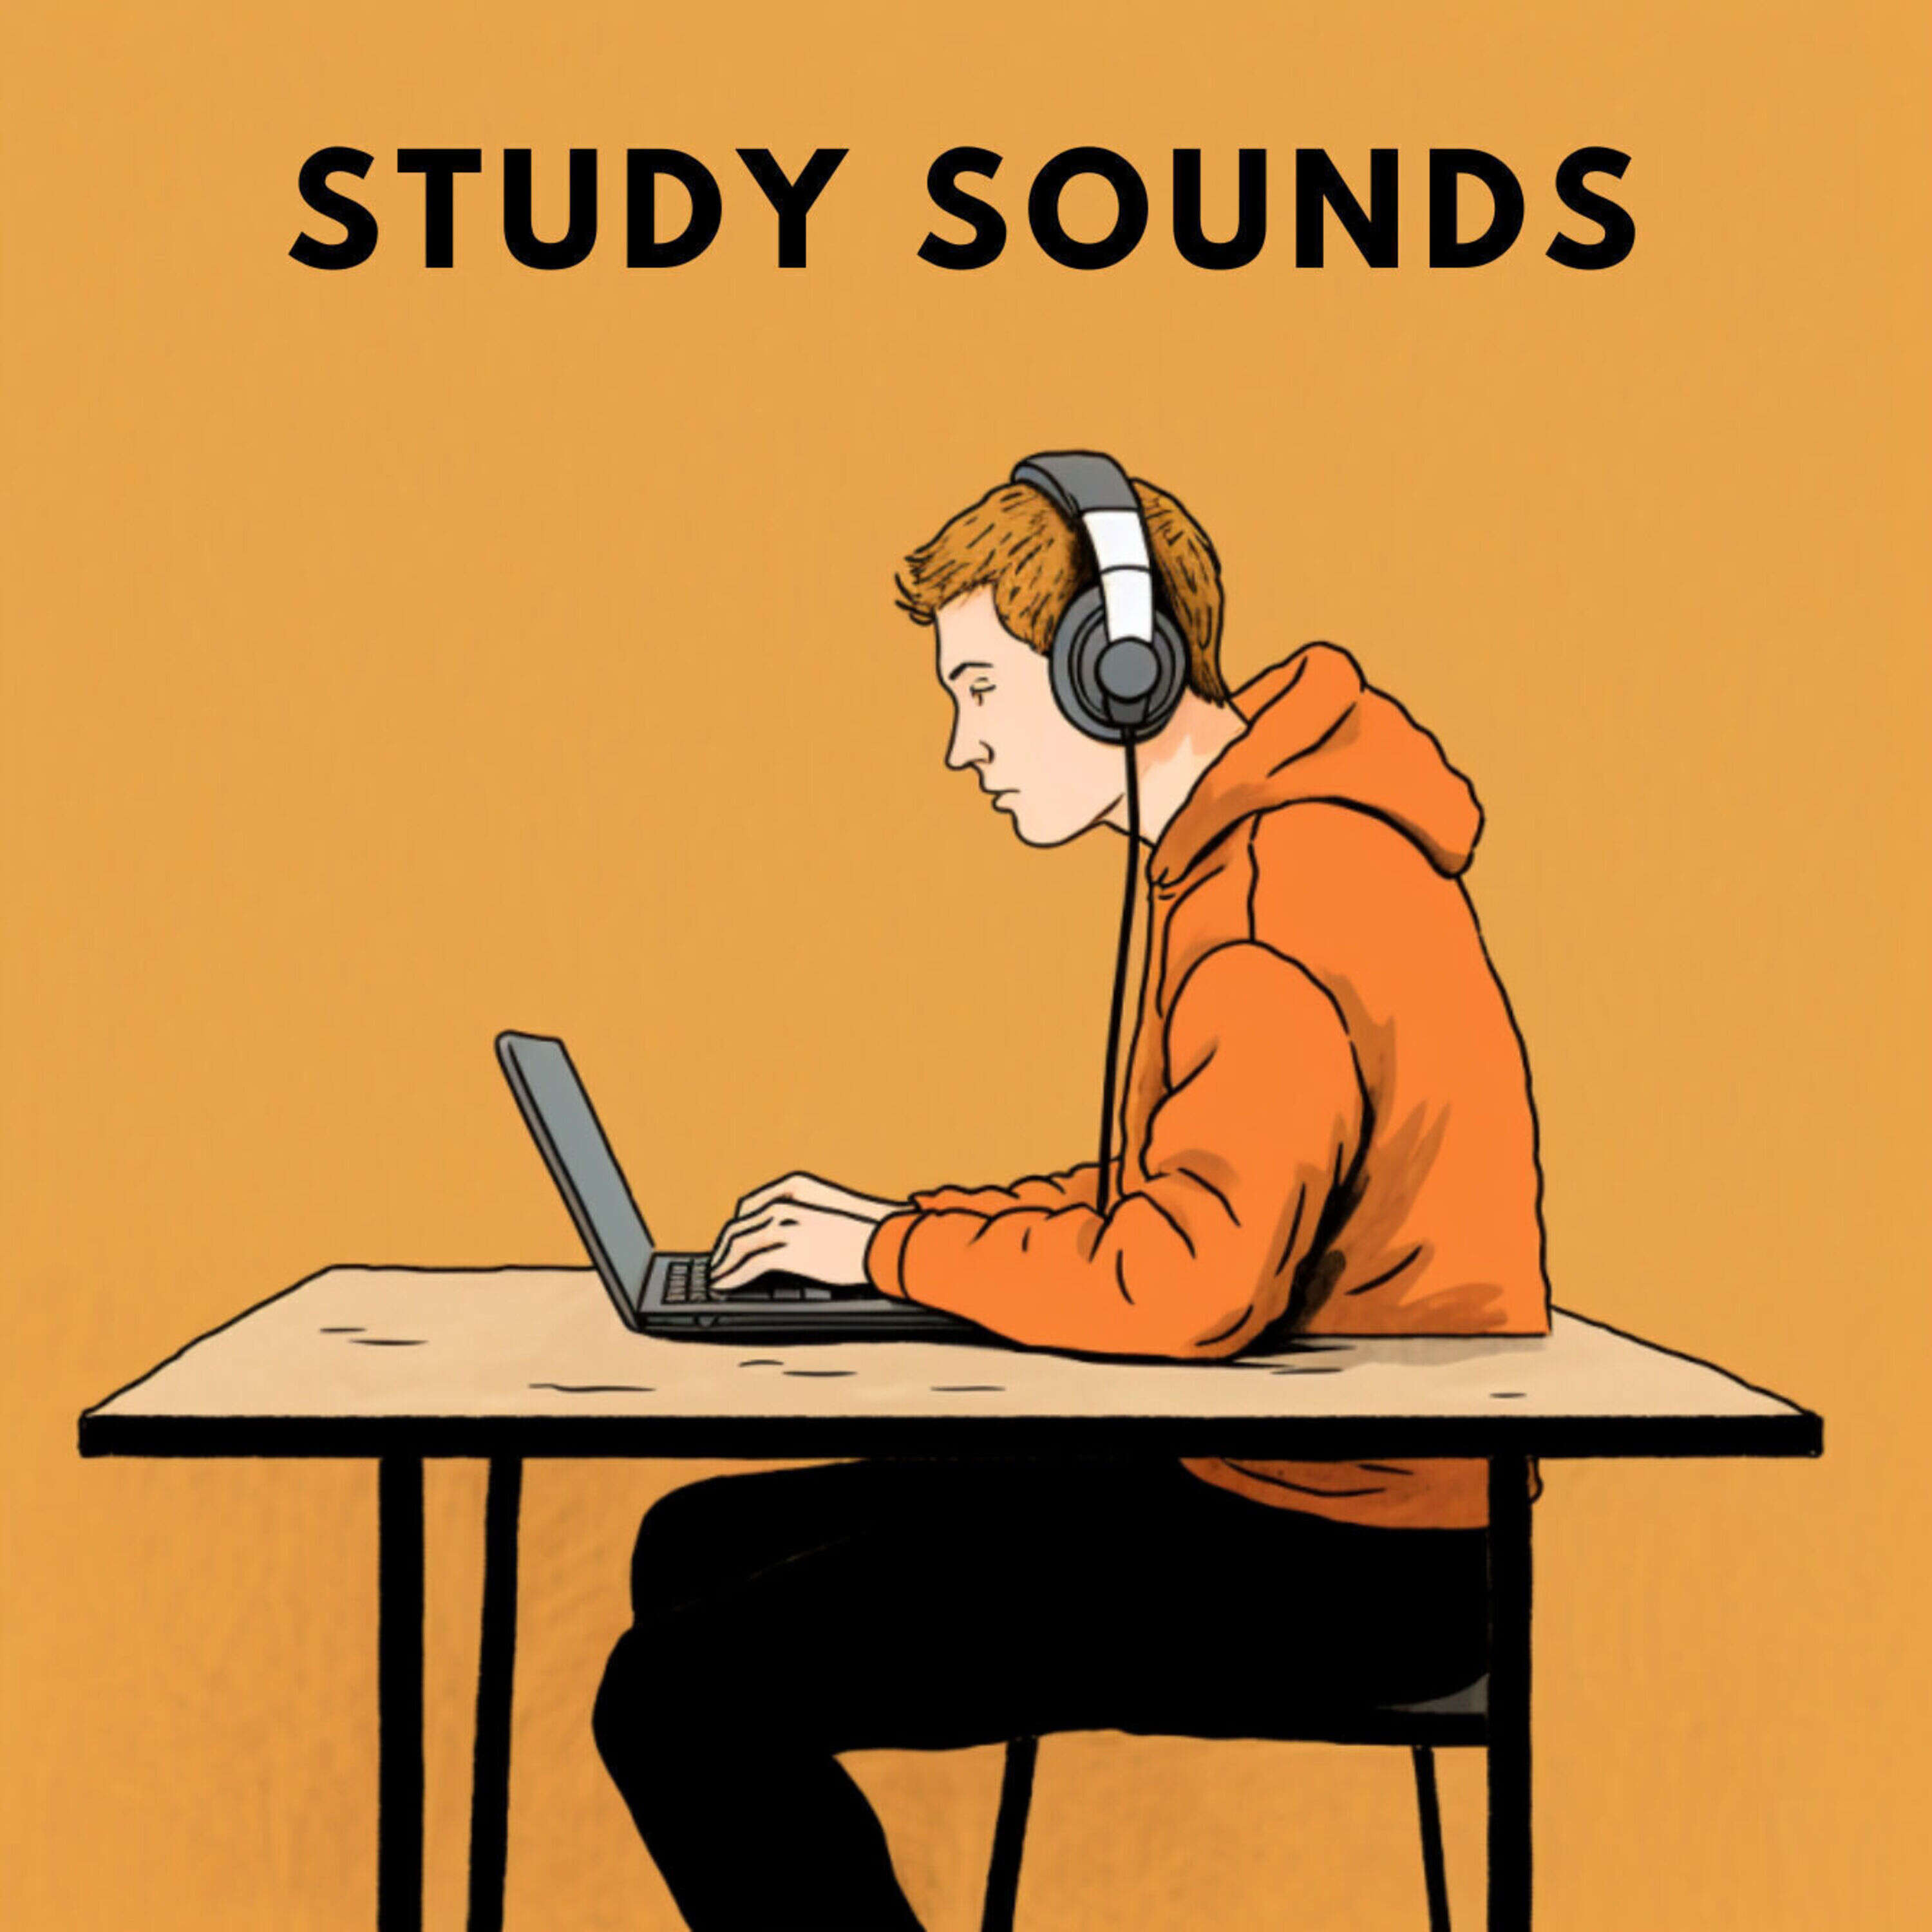 Study Sounds - 1 Hour Of Concentration Sounds for Studying and Memorizing